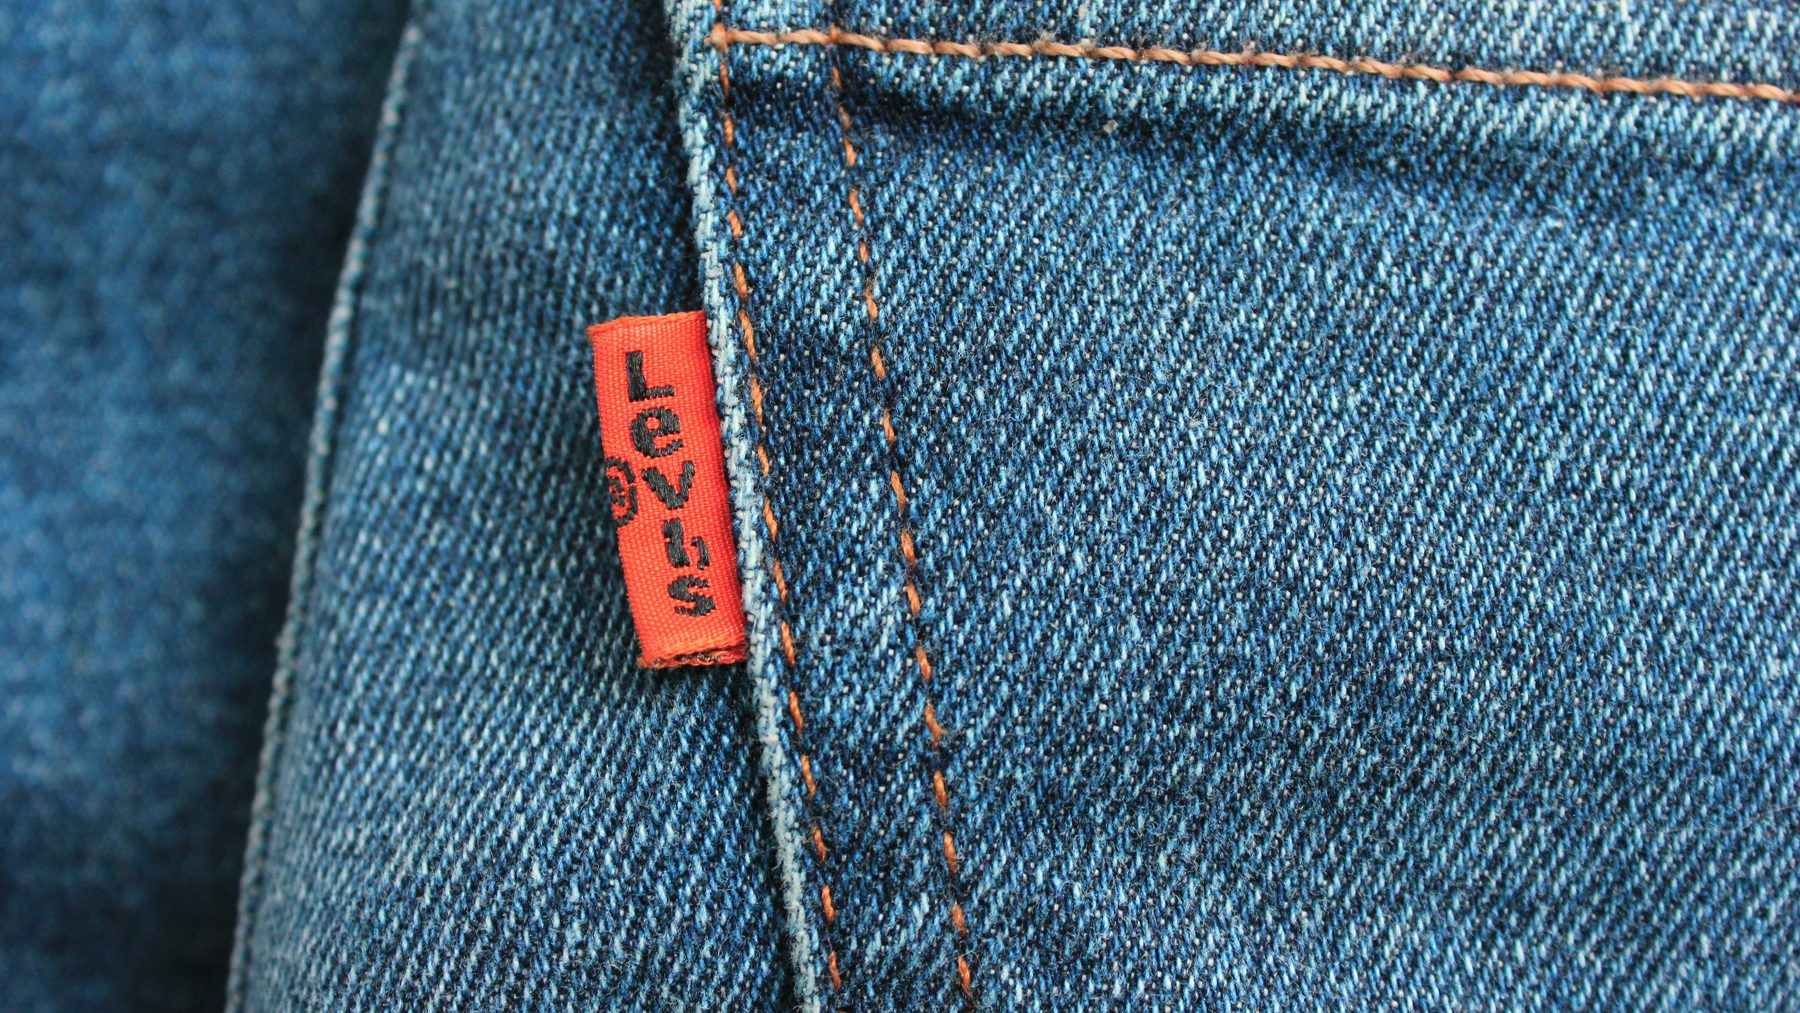 Can Levi's Corporate Values Survive a 